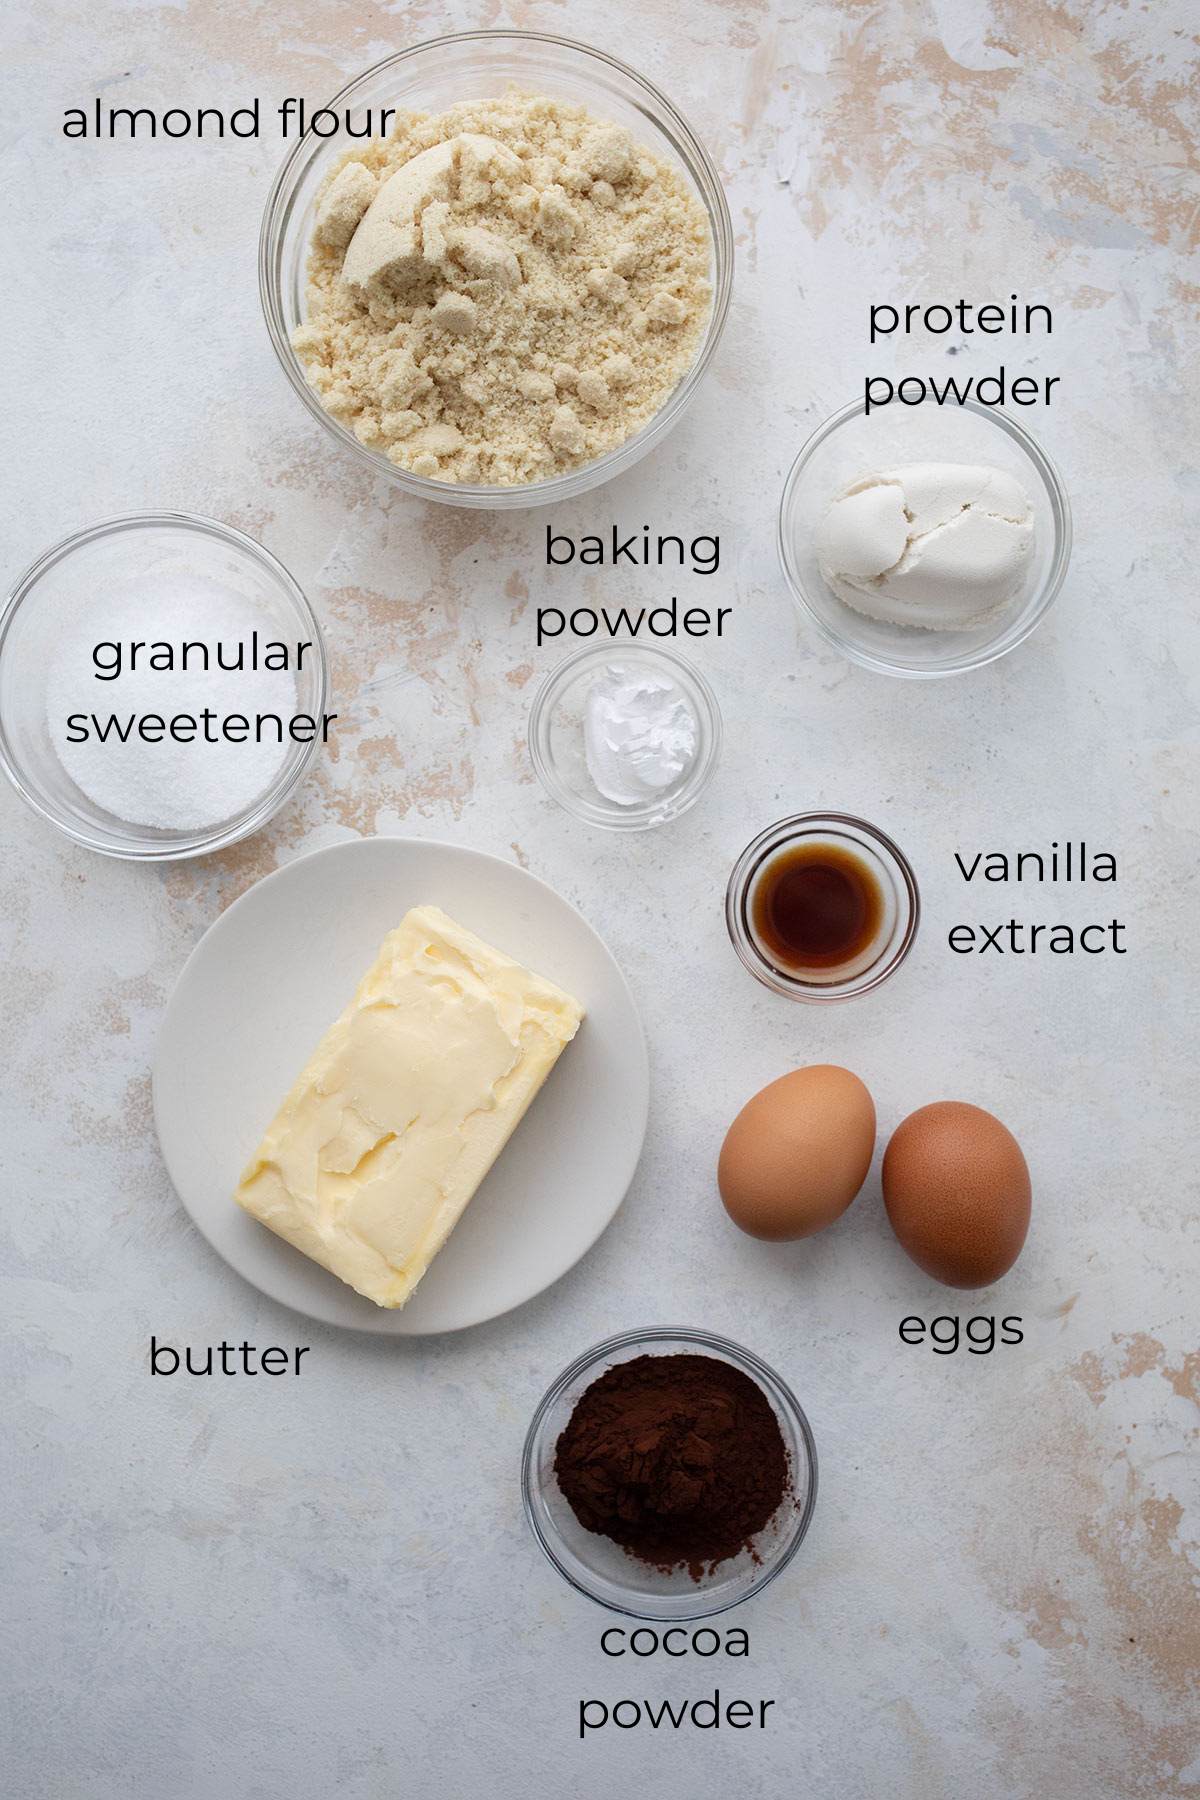 Top down image of ingredients needed for Keto Zebra Cake.